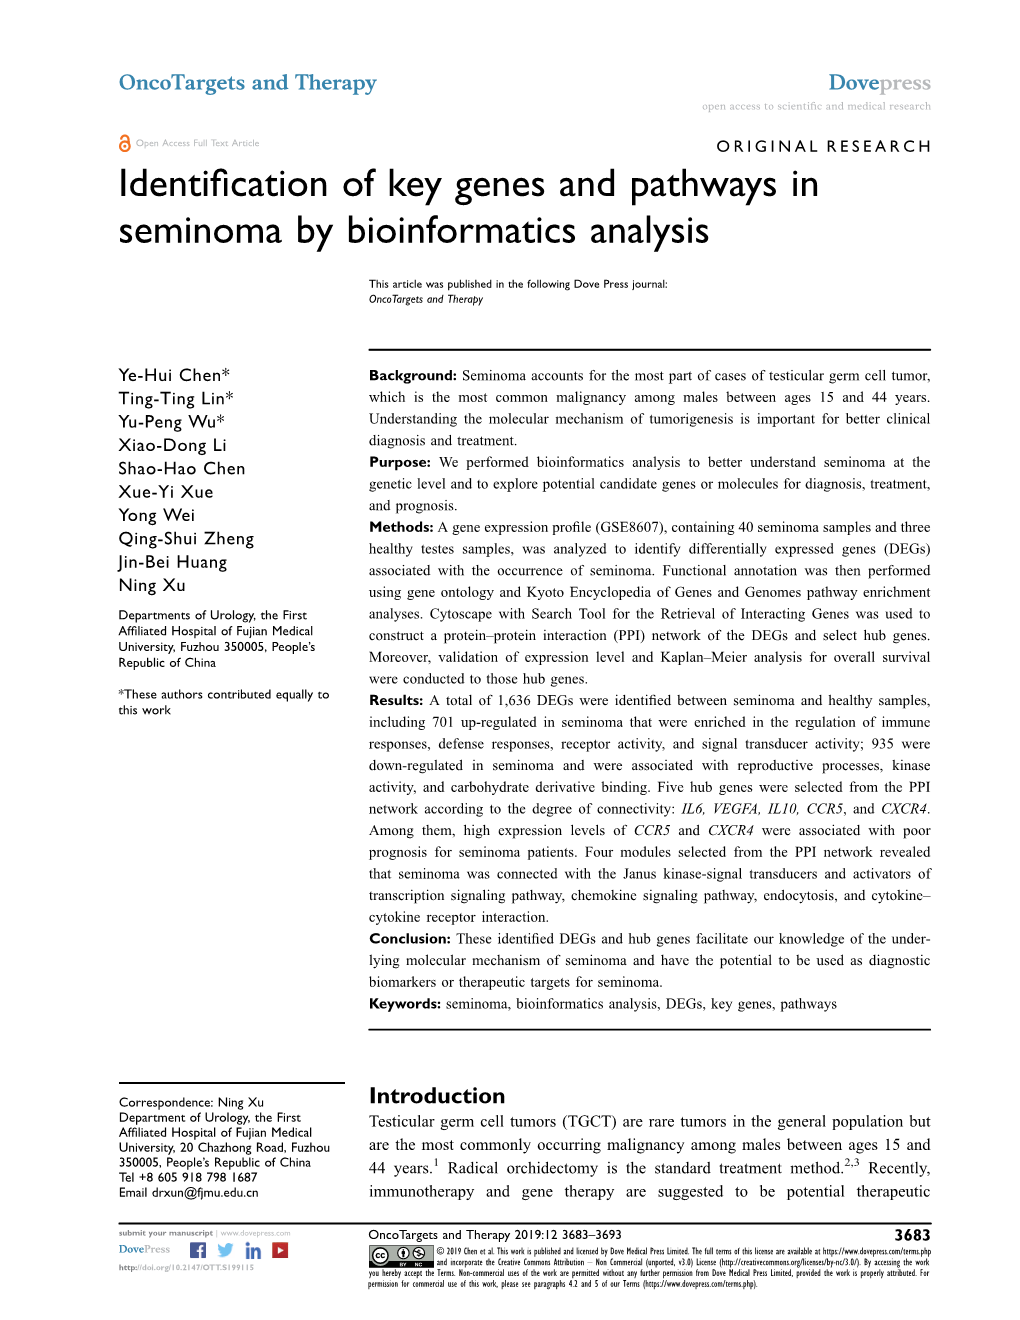 Identification of Key Genes and Pathways in Seminoma By